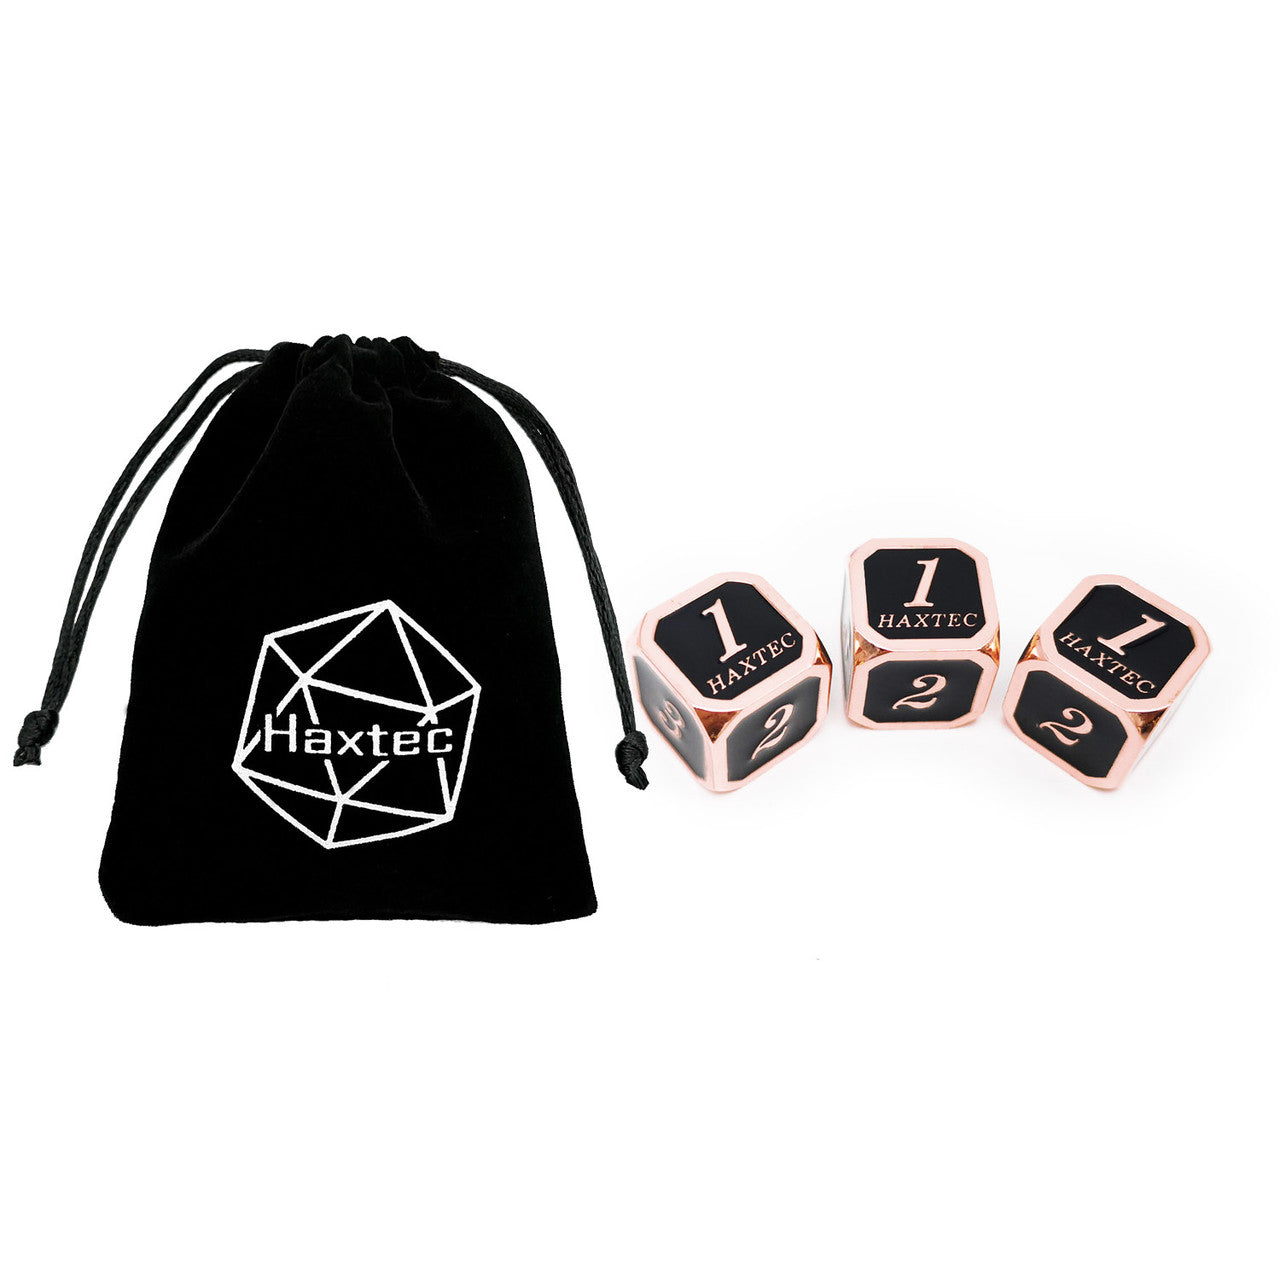 Haxtec D6 dice  copper black with protect bag